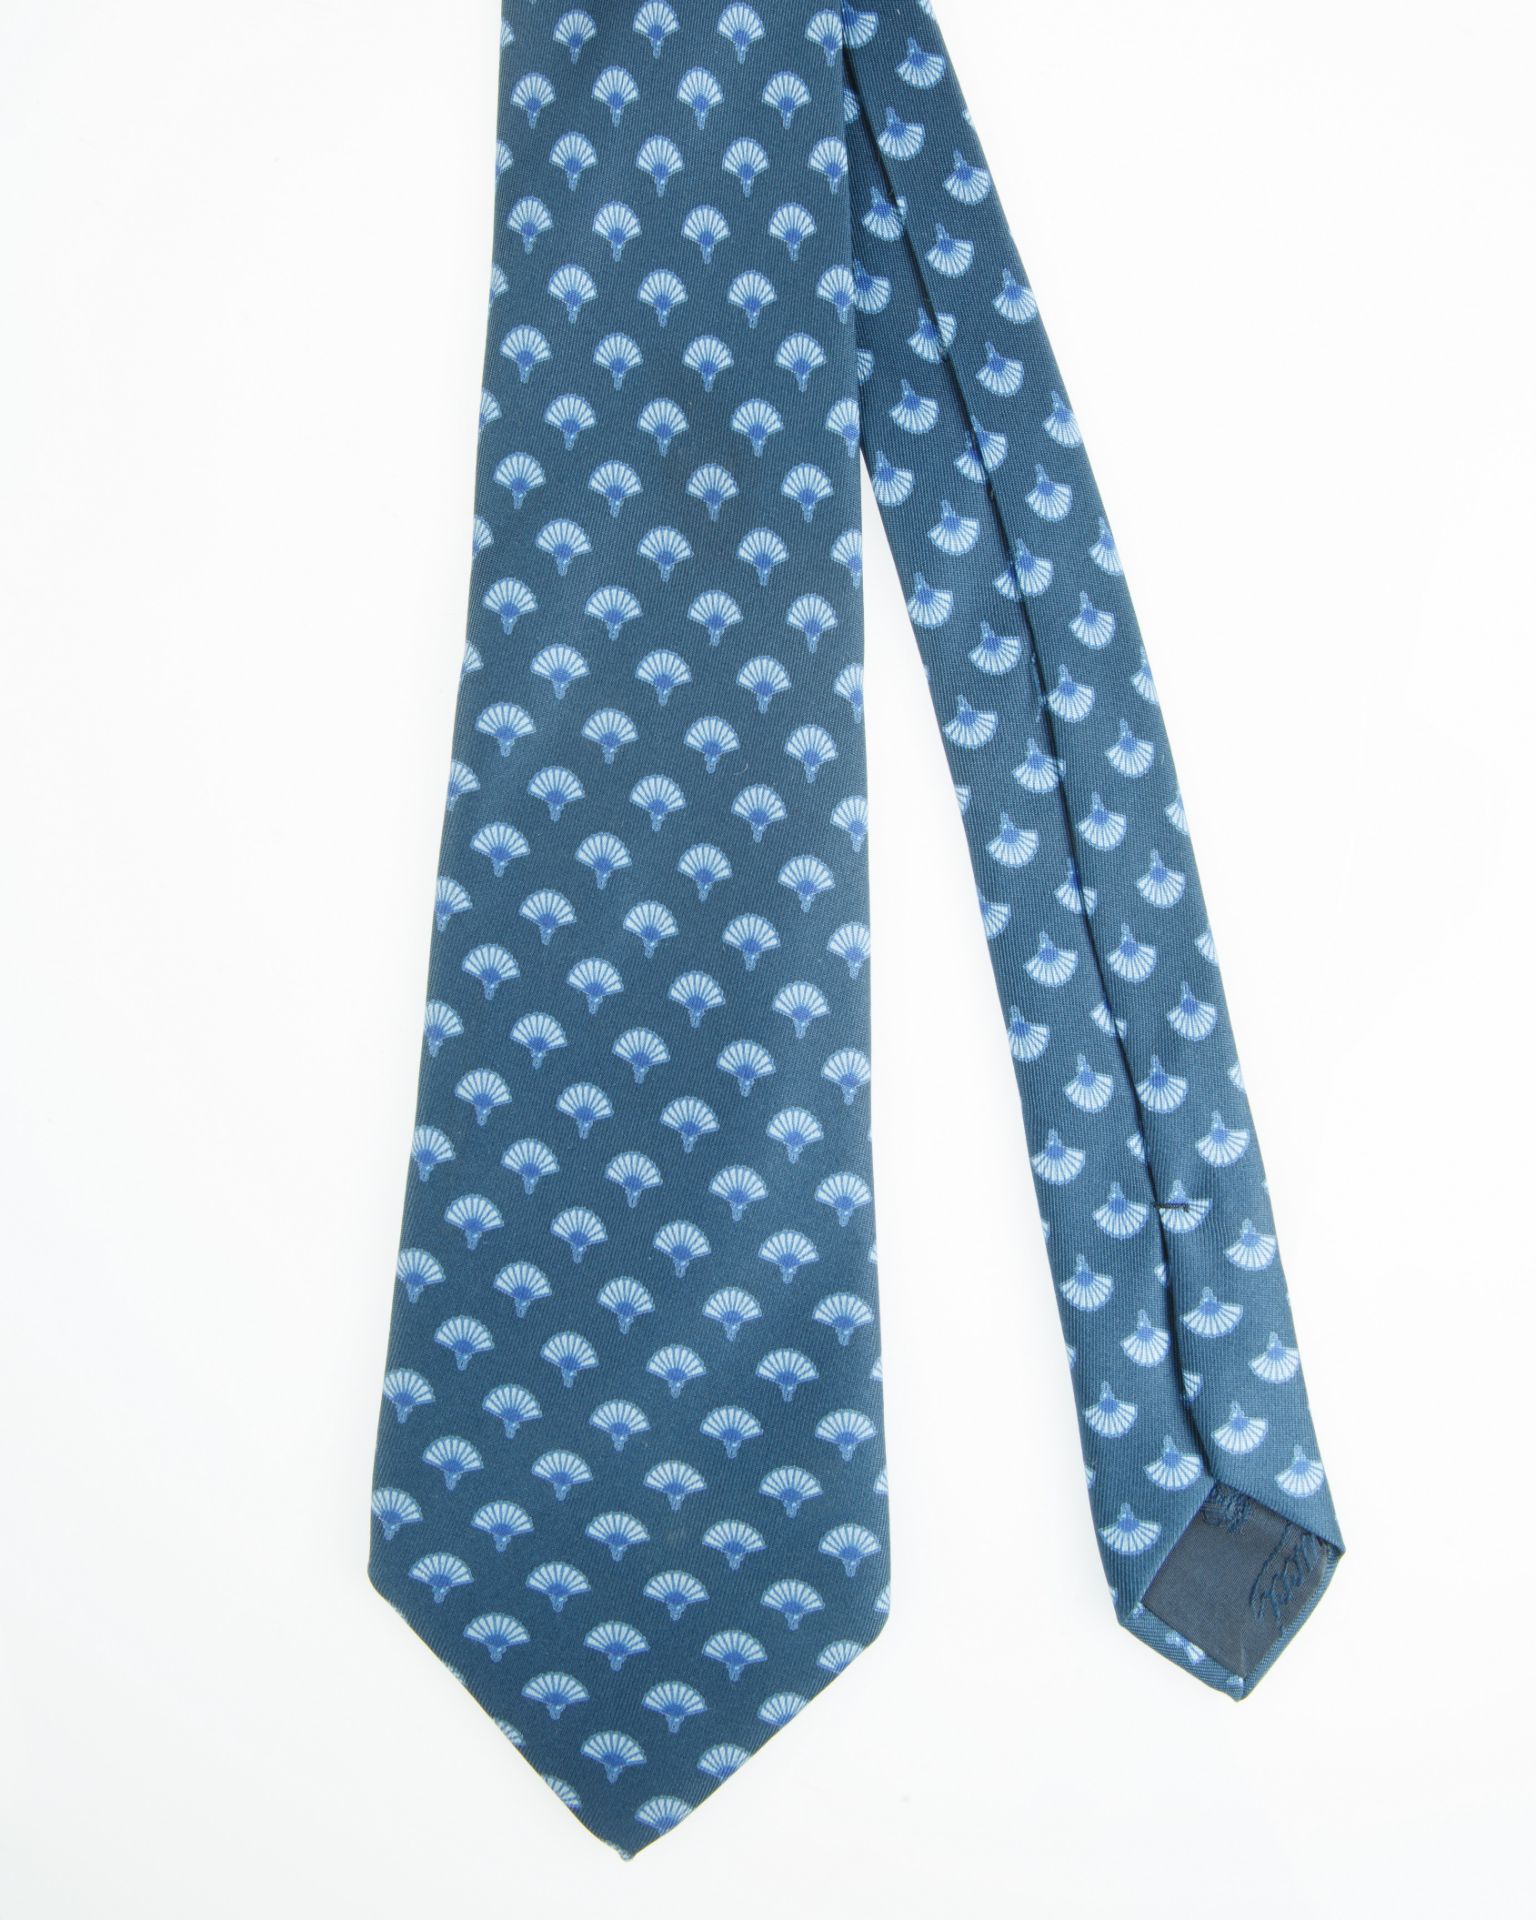 GROUP OF SEVEN GUCCI TIES - Image 6 of 15